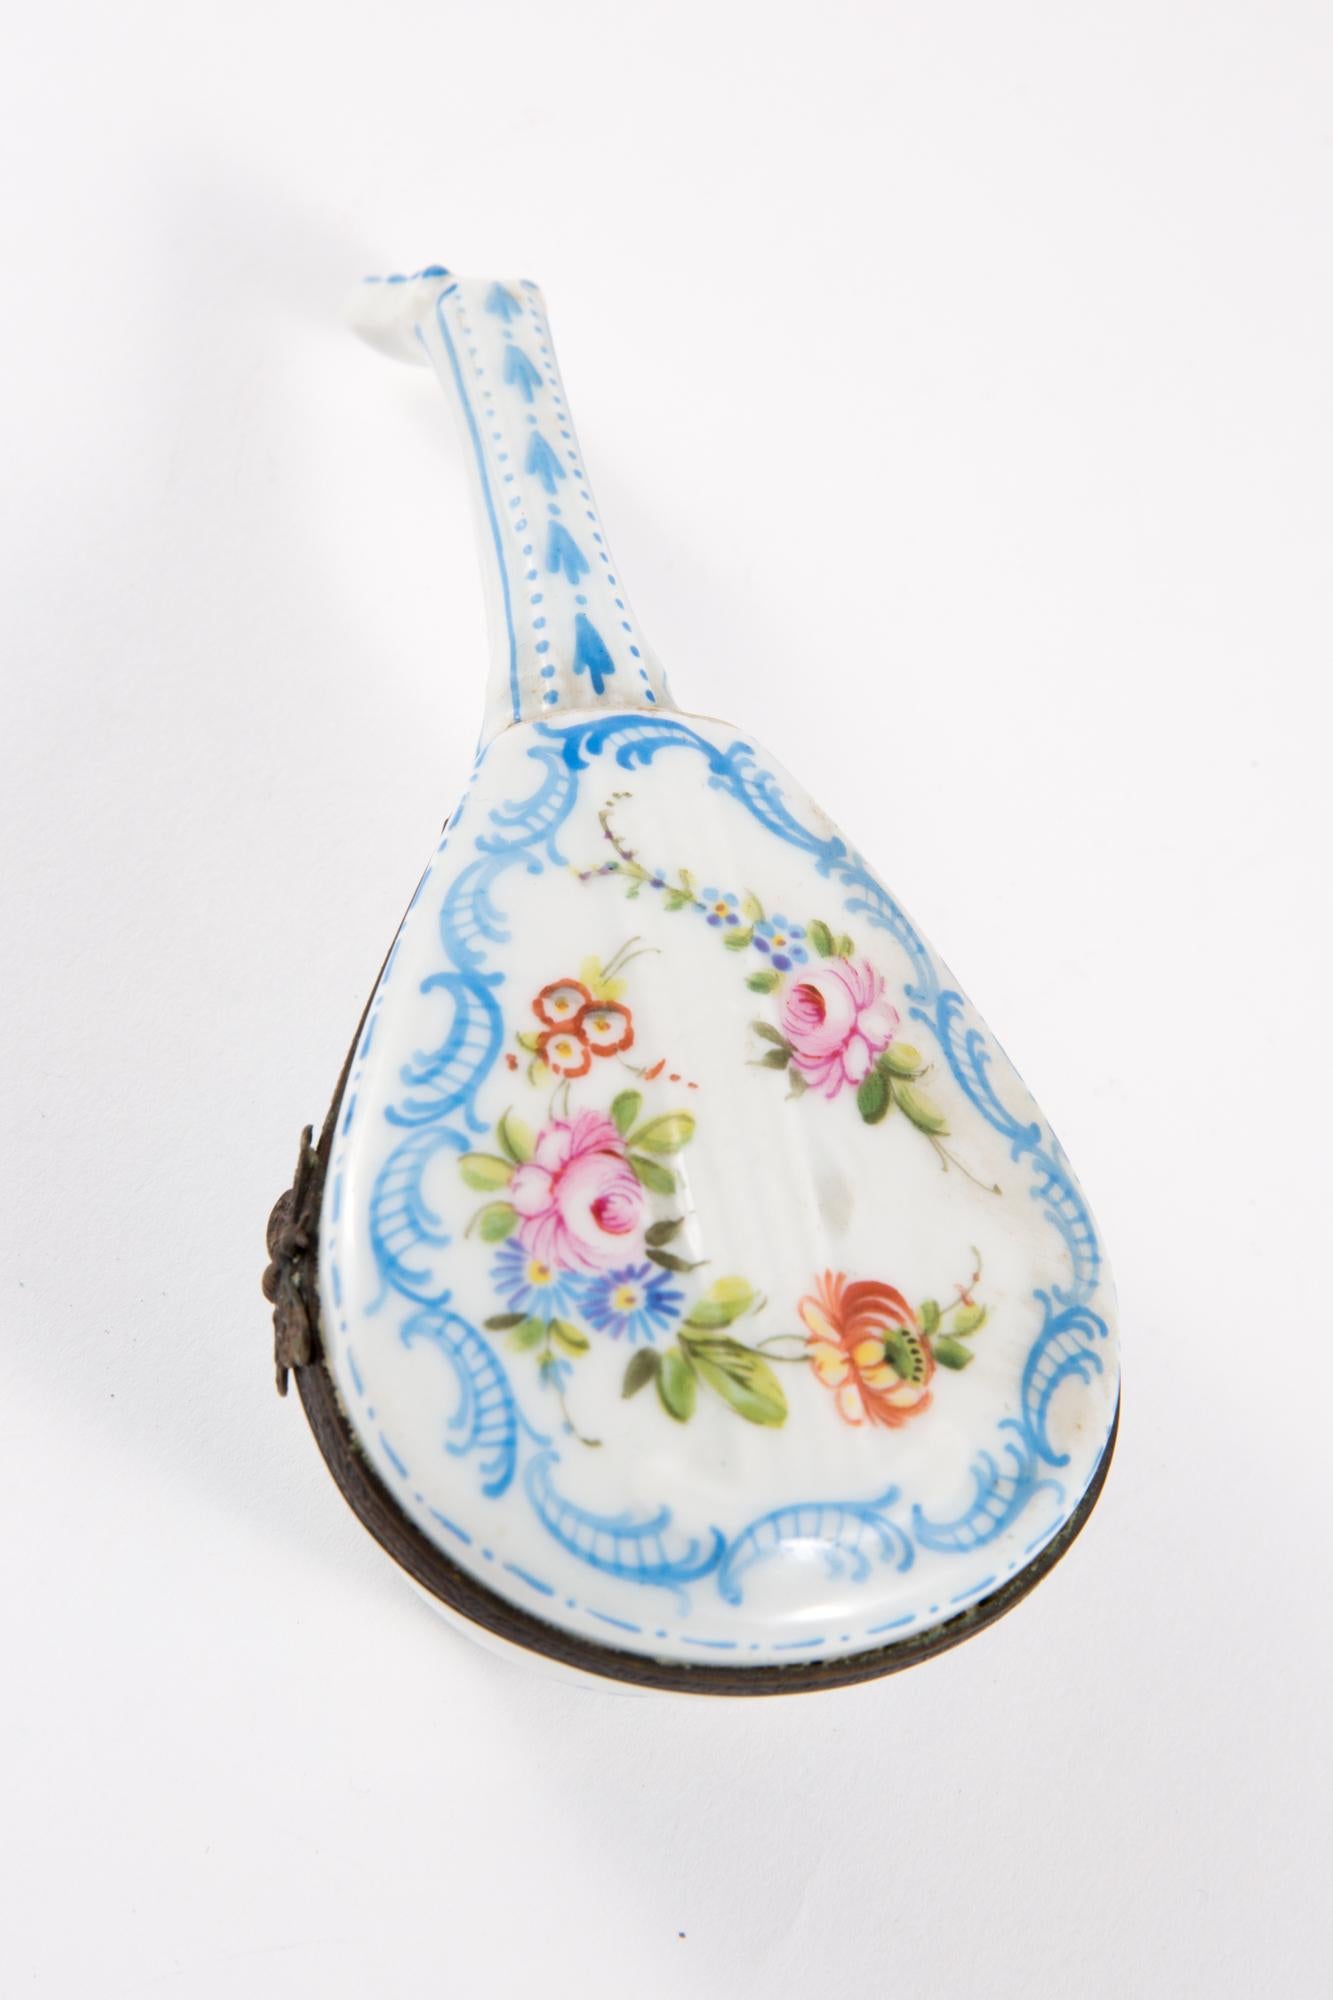 Porcelain mandolin pill box featuring a metal frame a butterfly clasp and a polychrome floral decor.
In good vintage condition. Made in France. 
Height 1.5in. (4cm)
Length 5.5in. (14cm)
Width 2.3in. (6cm)
We guarantee you will receive this gorgeous